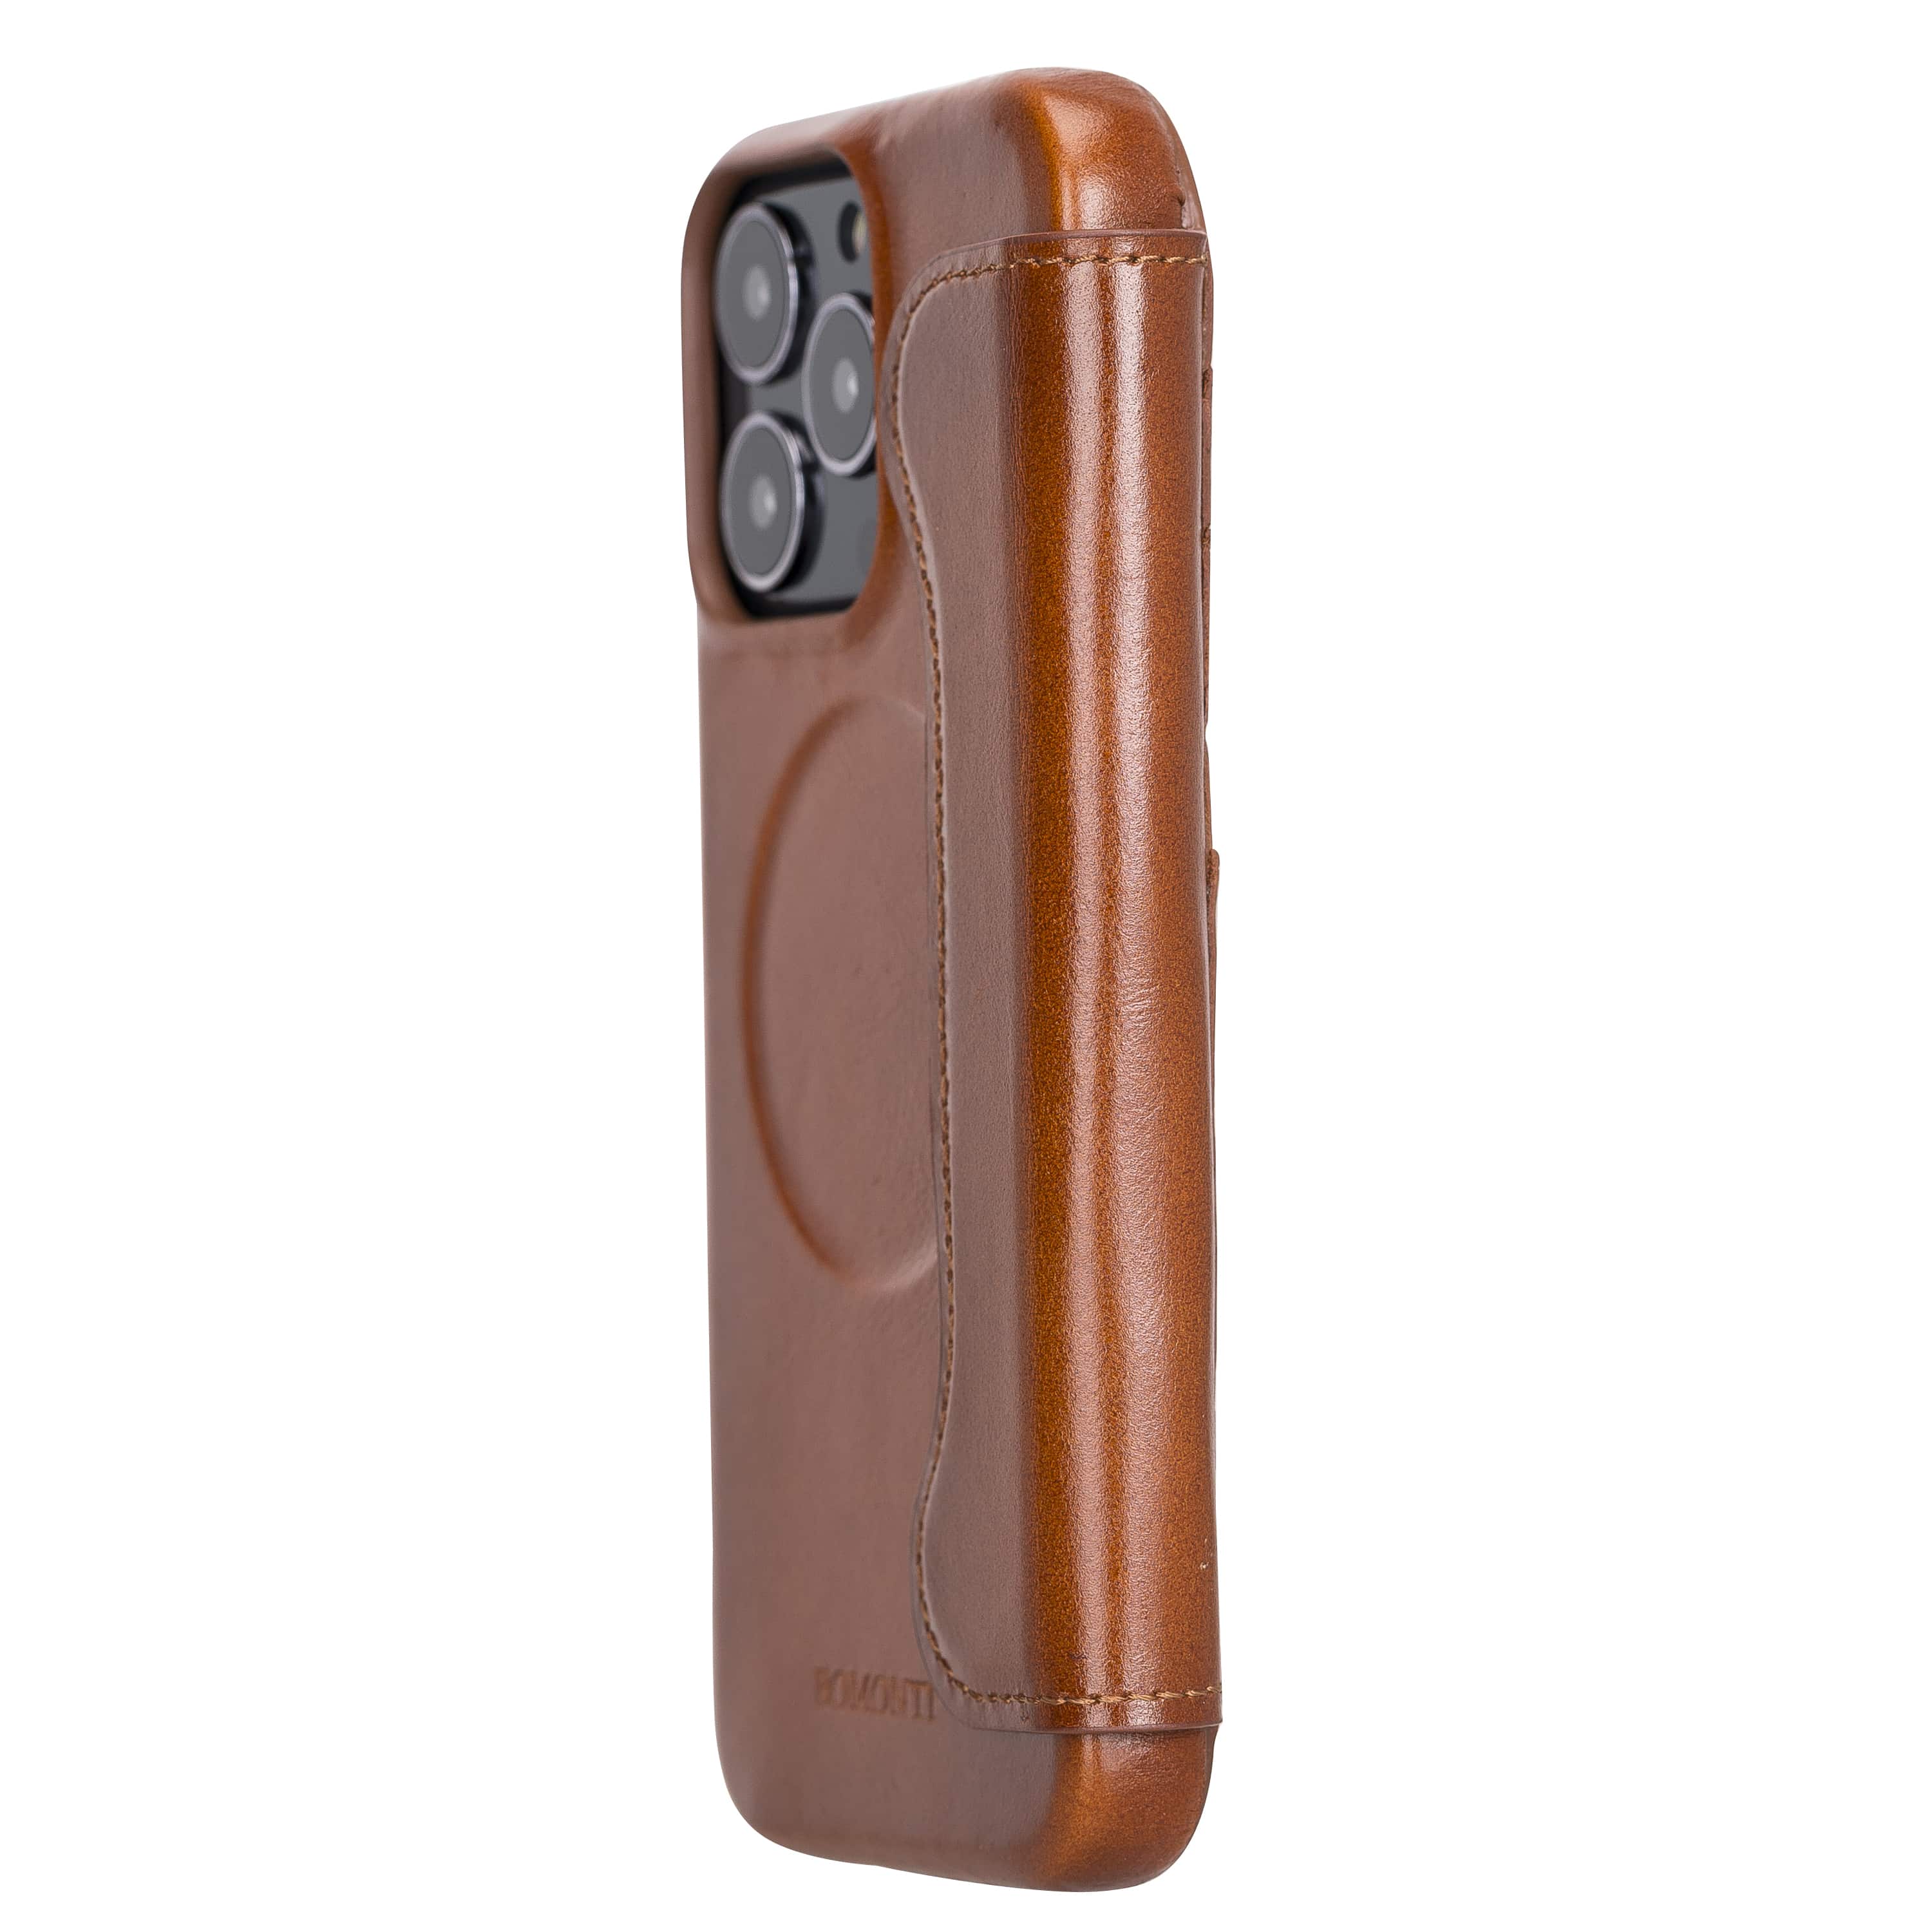 Insignia - Leather Wallet Case for iPhone 14 Pro Max - Bourbon